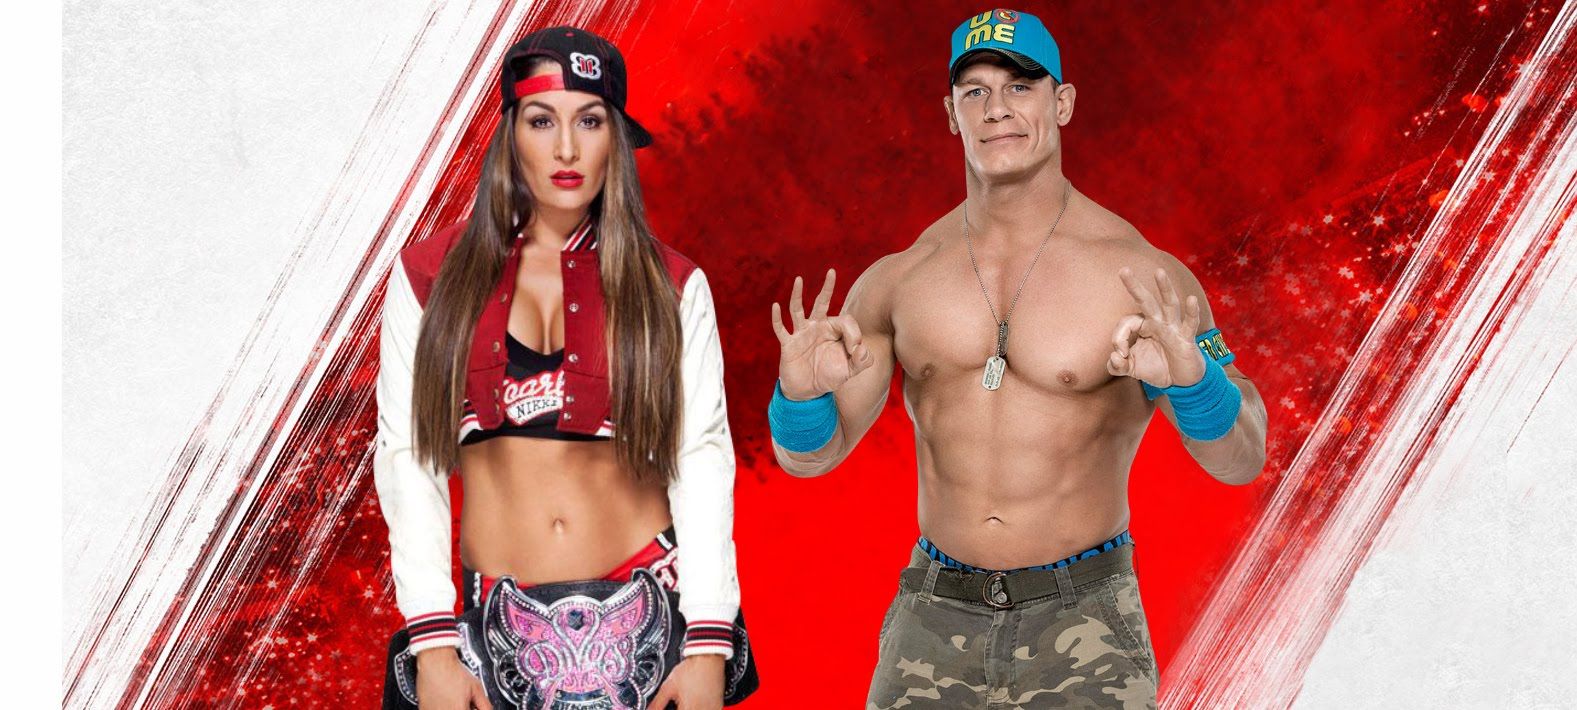 Reason why WWE is planning to team up John Cena and Nikki Bella